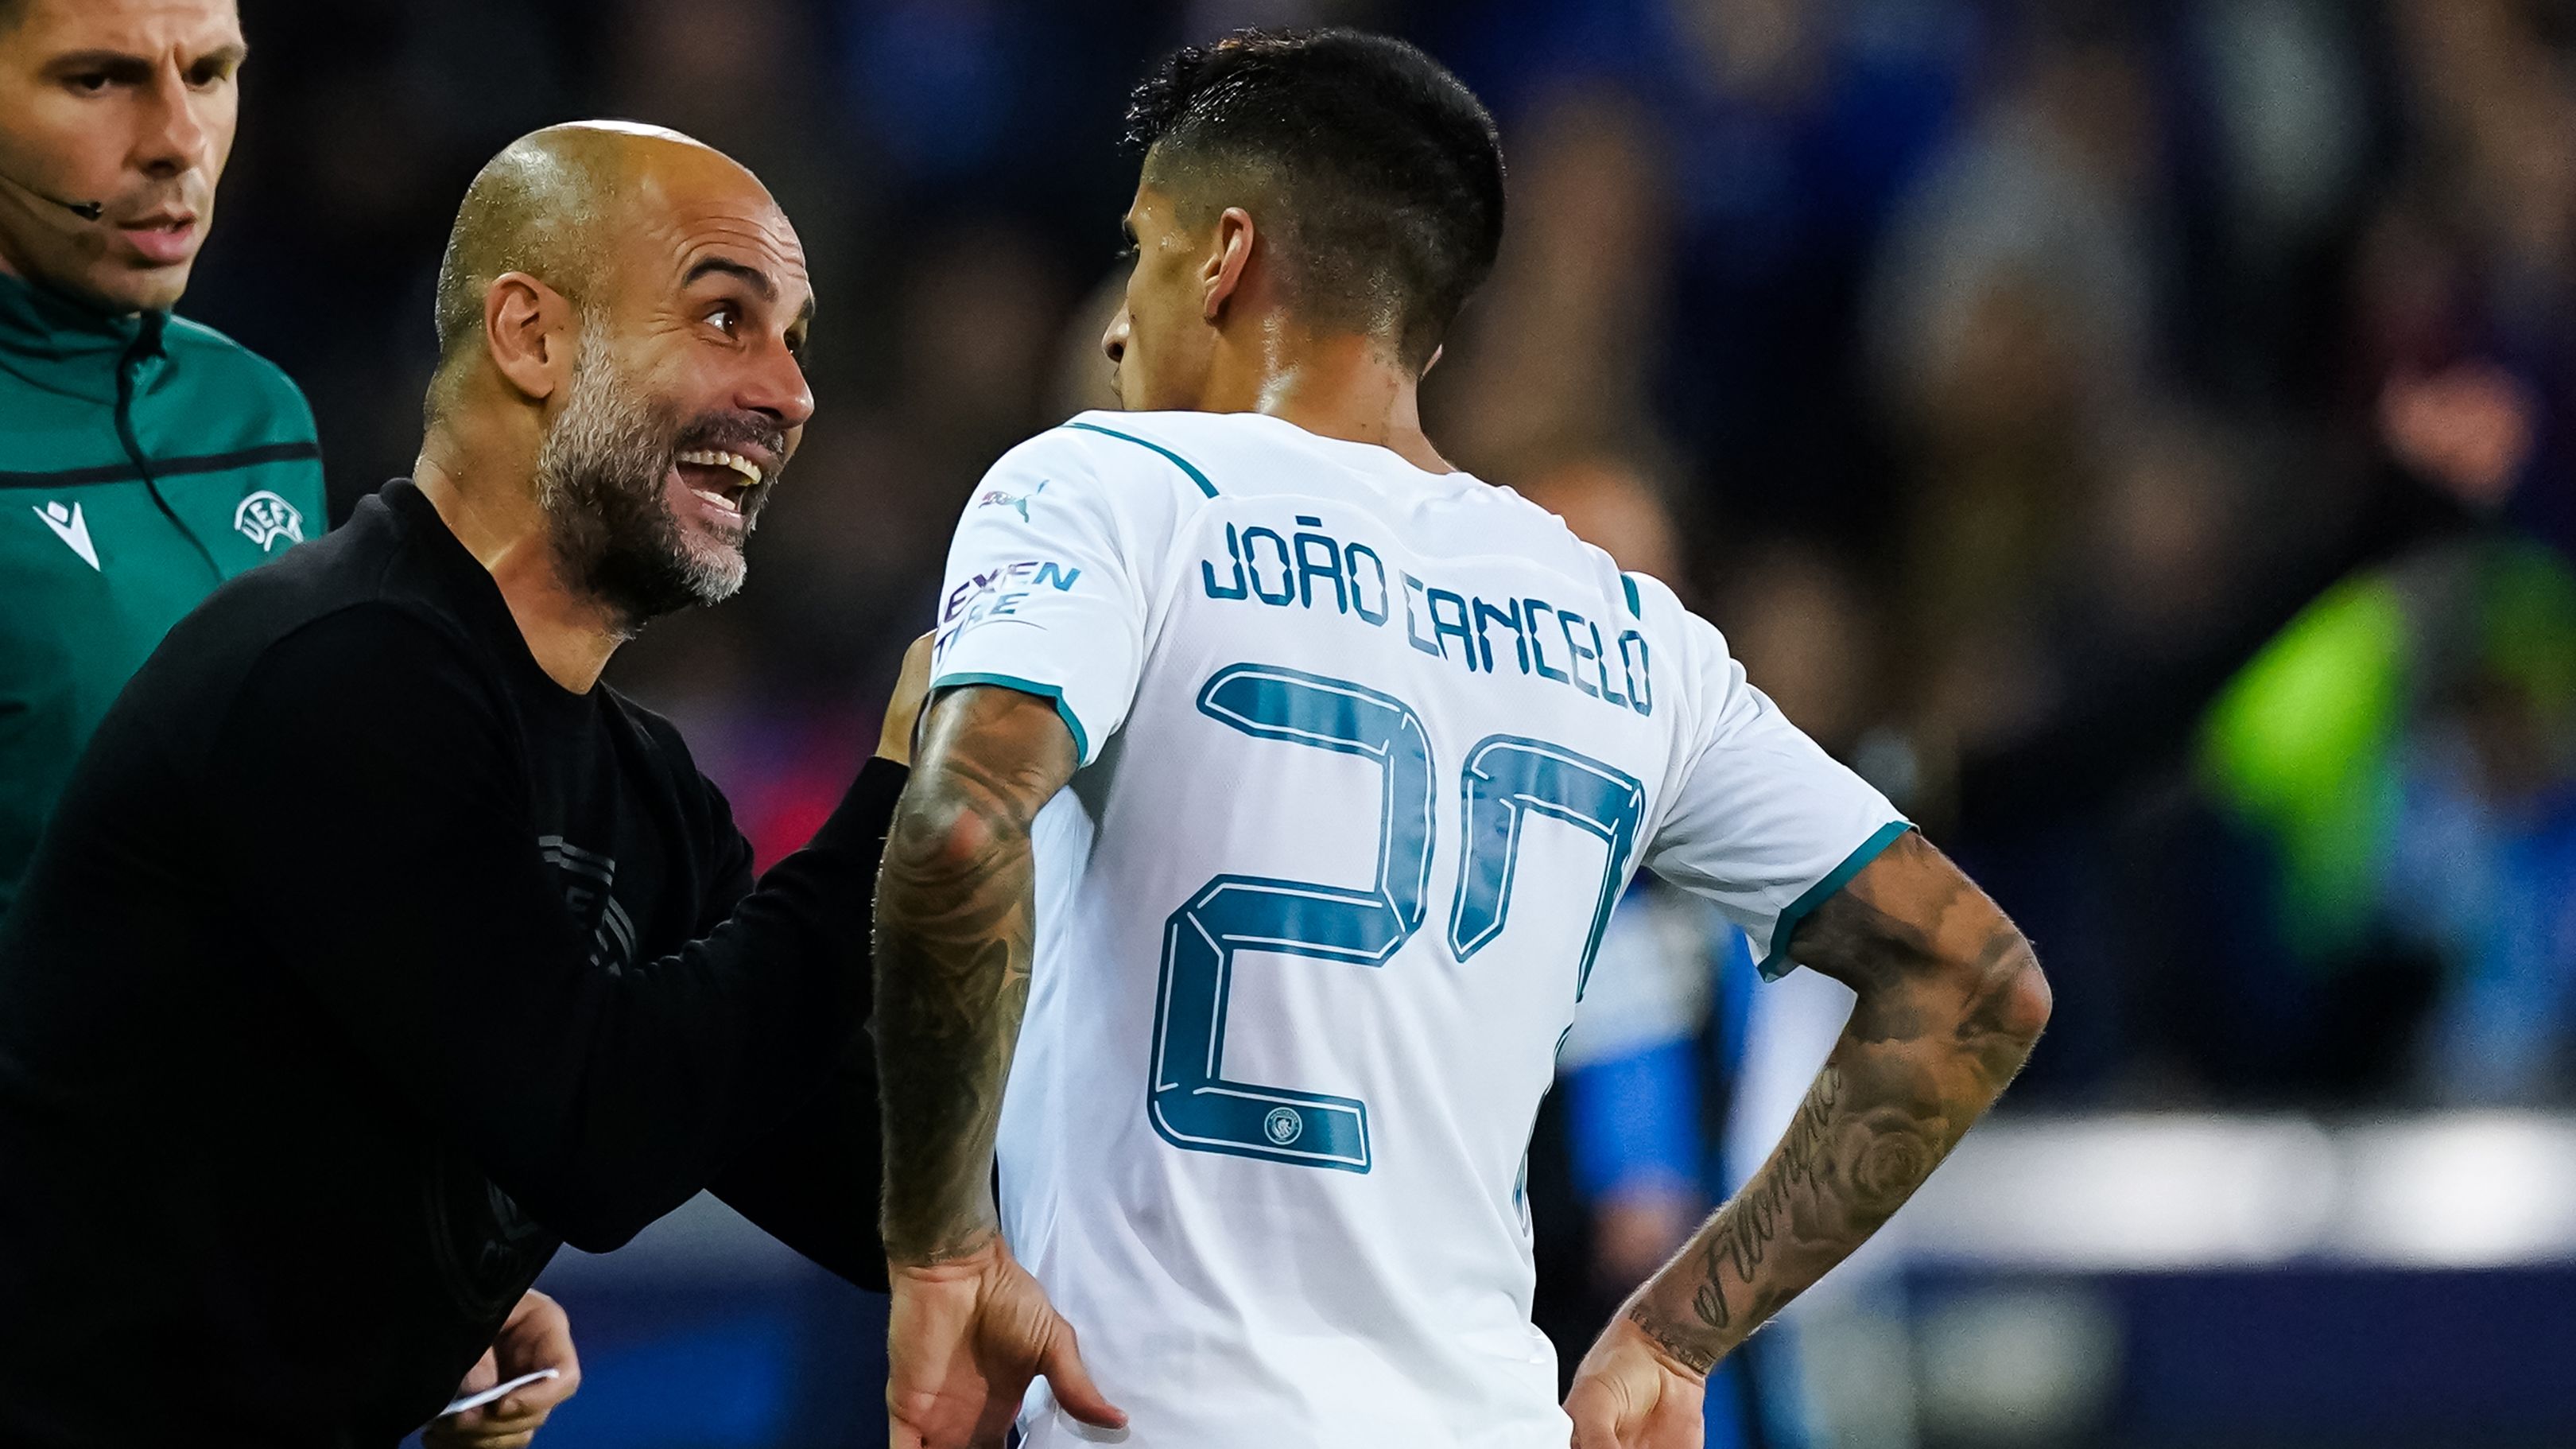 Pep Guardiola of Manchester City in discussion with Joao Cancelo.